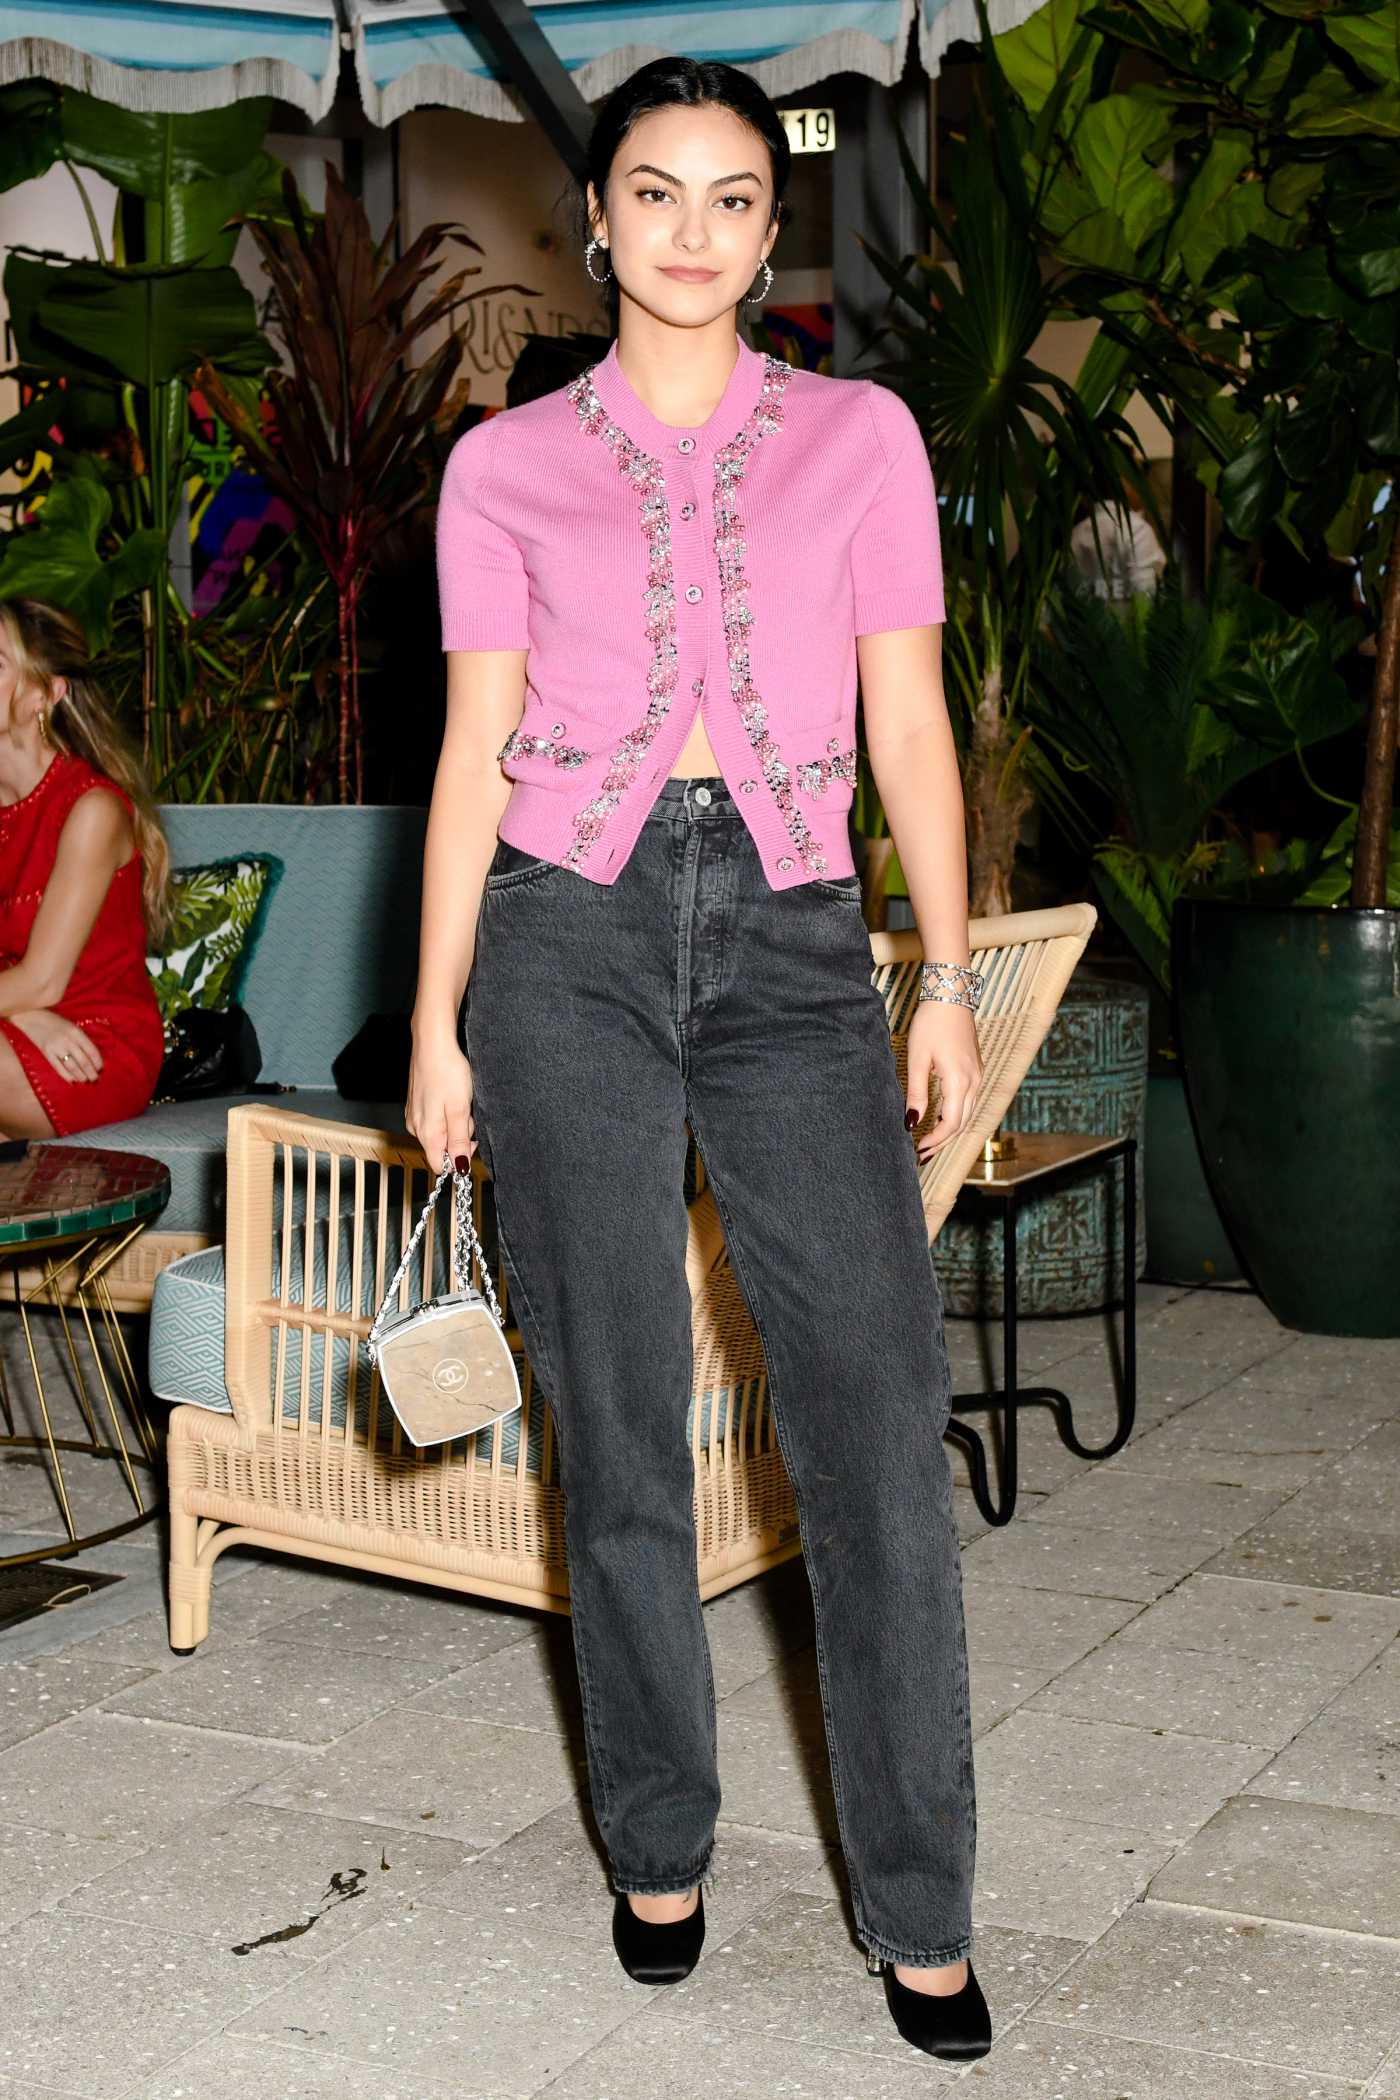 Camila Mendes in a Pink Blouse Attends the Chanel Cocktail Party to Celebrate the Opening of the New Boutique in Miami 12/02/2021